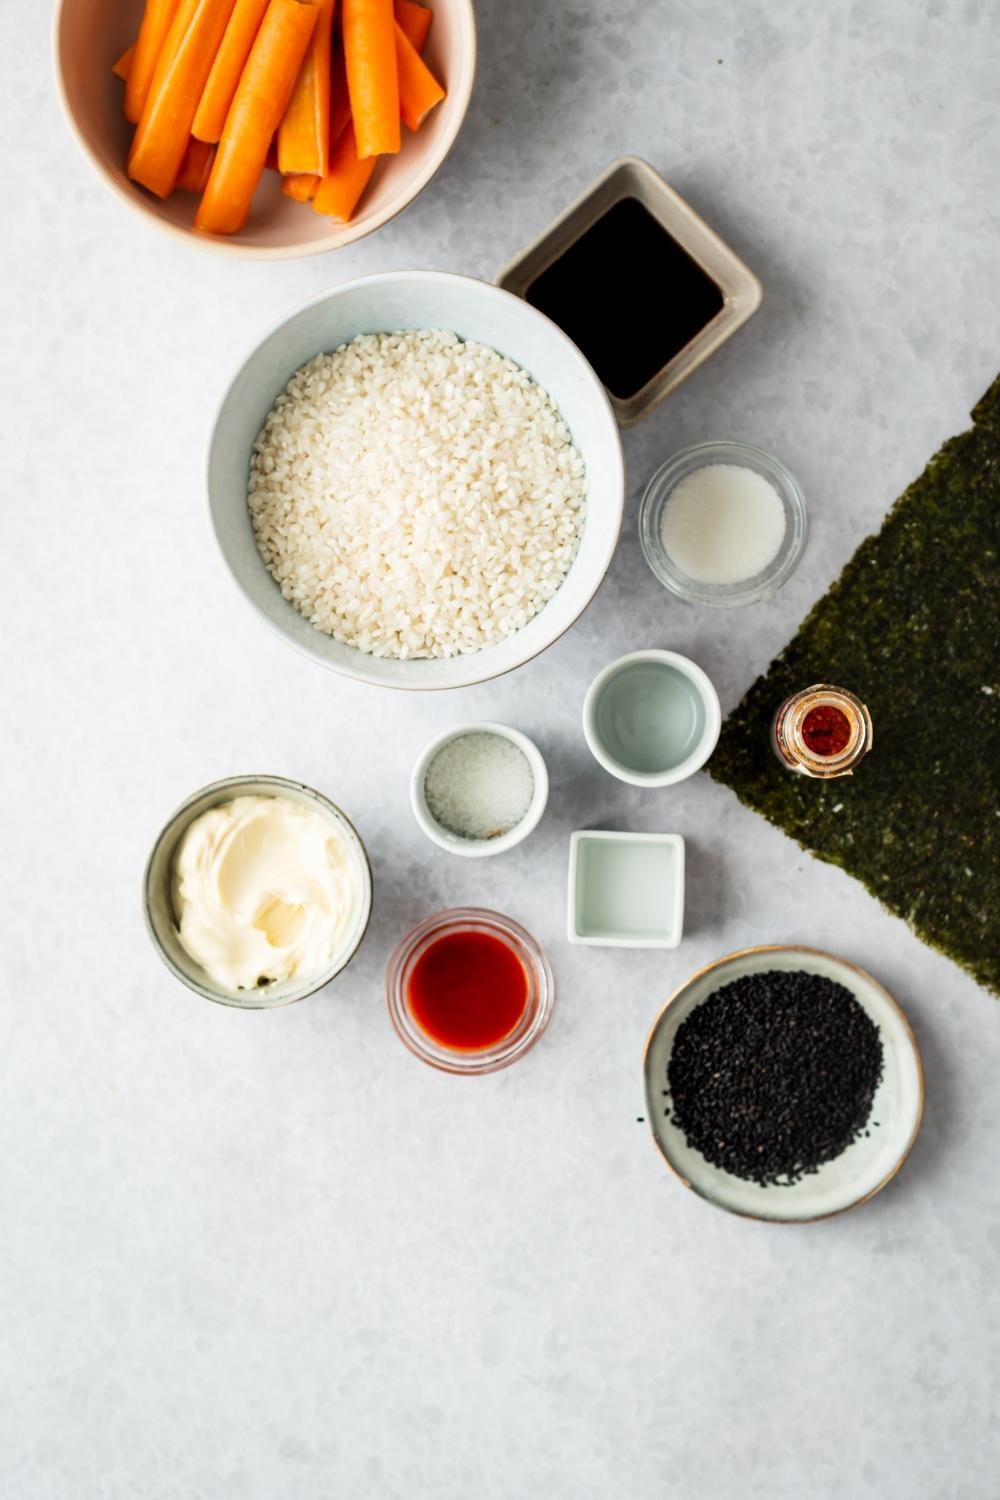 individual bowls of rice, carrots, black sesame seeds, mayonnaise, and other sushi bake ingredients